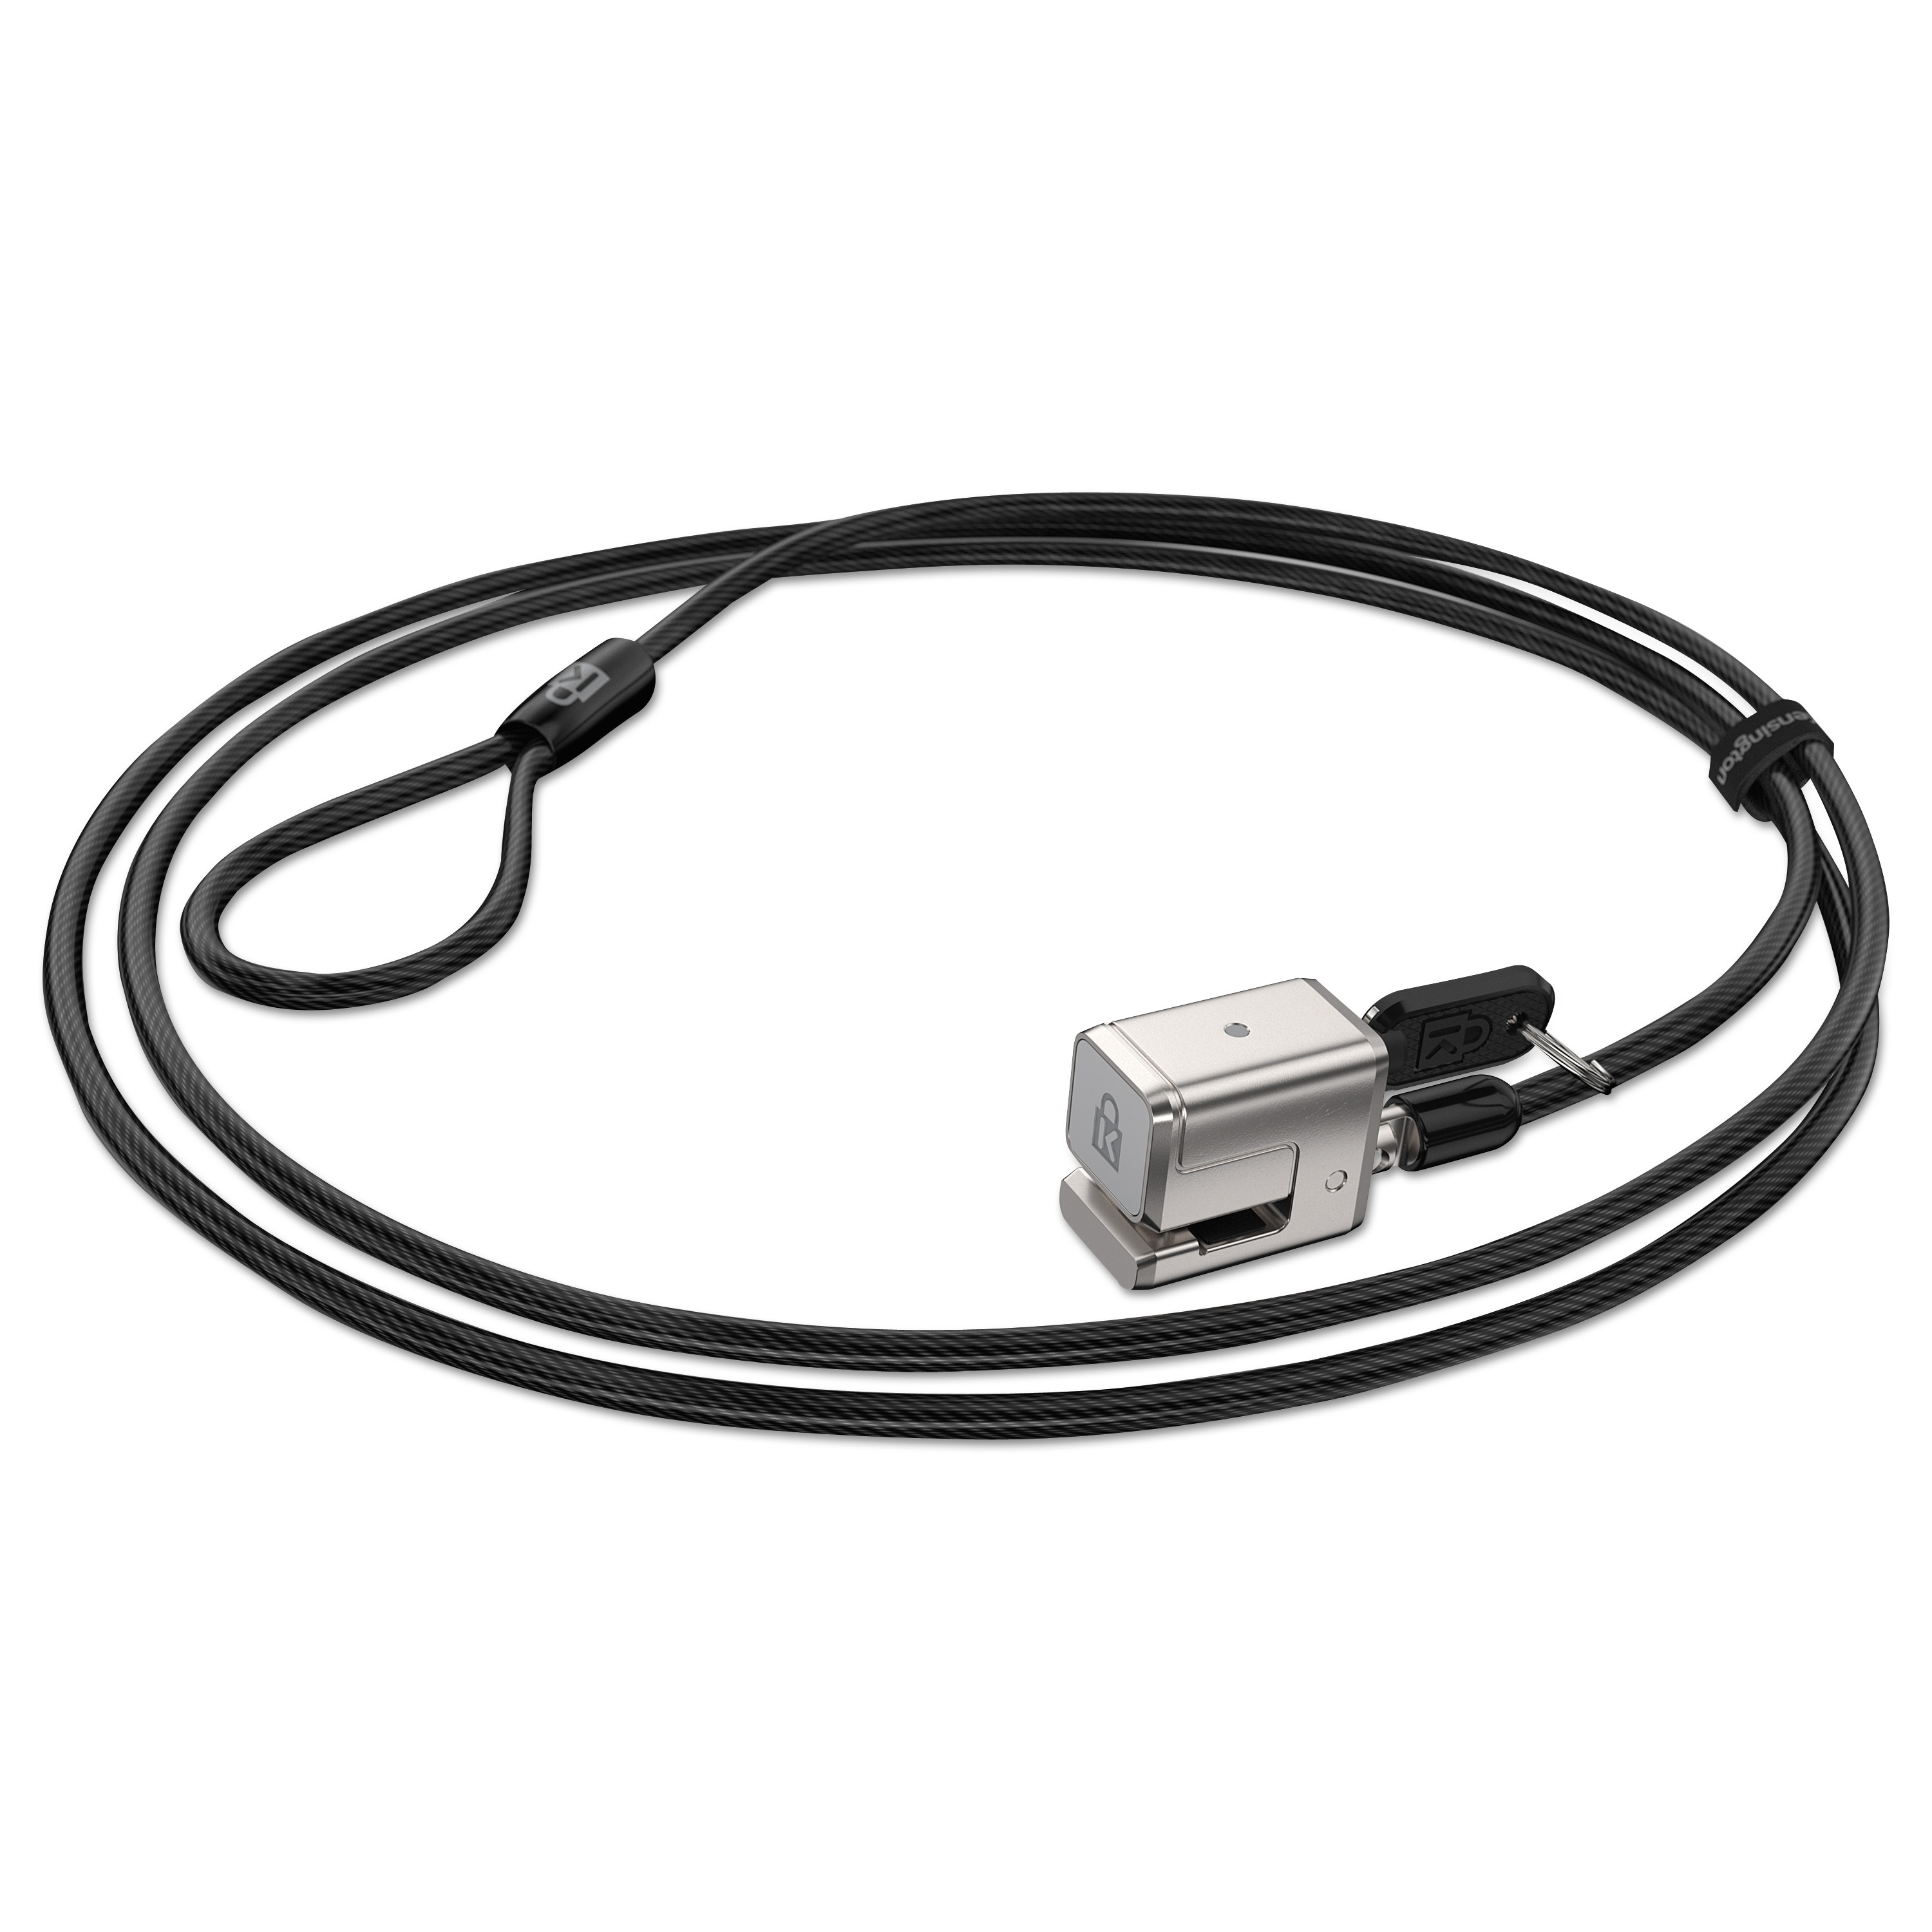  Kensington K62055WW Keyed Cable Lock for Surface Pro, 6 ft Carbon Steel Cable, 2 Keys (KMW62055) 